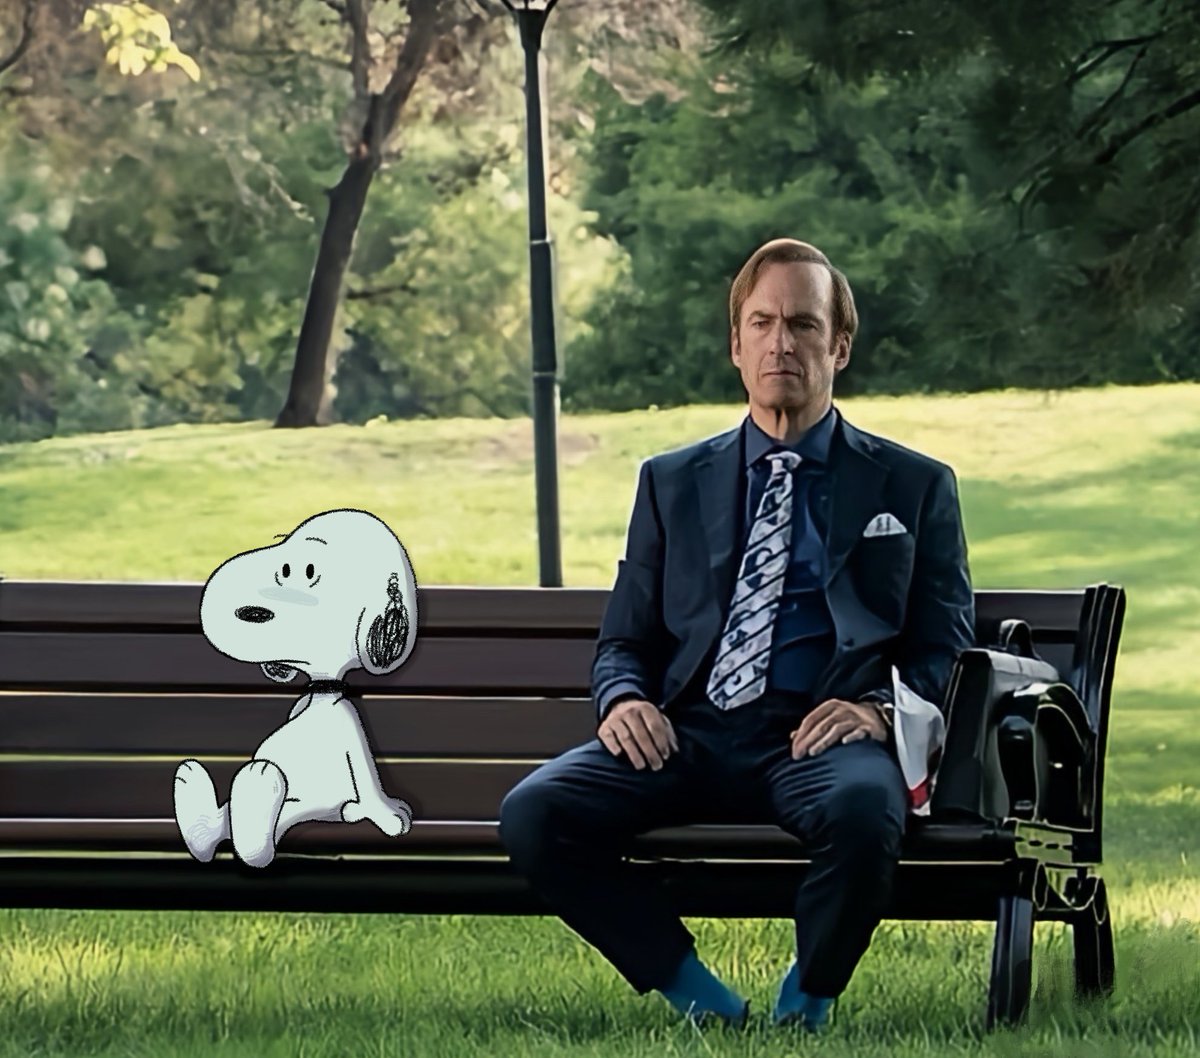 I think we’re gonna have to kill this guy Snoopy